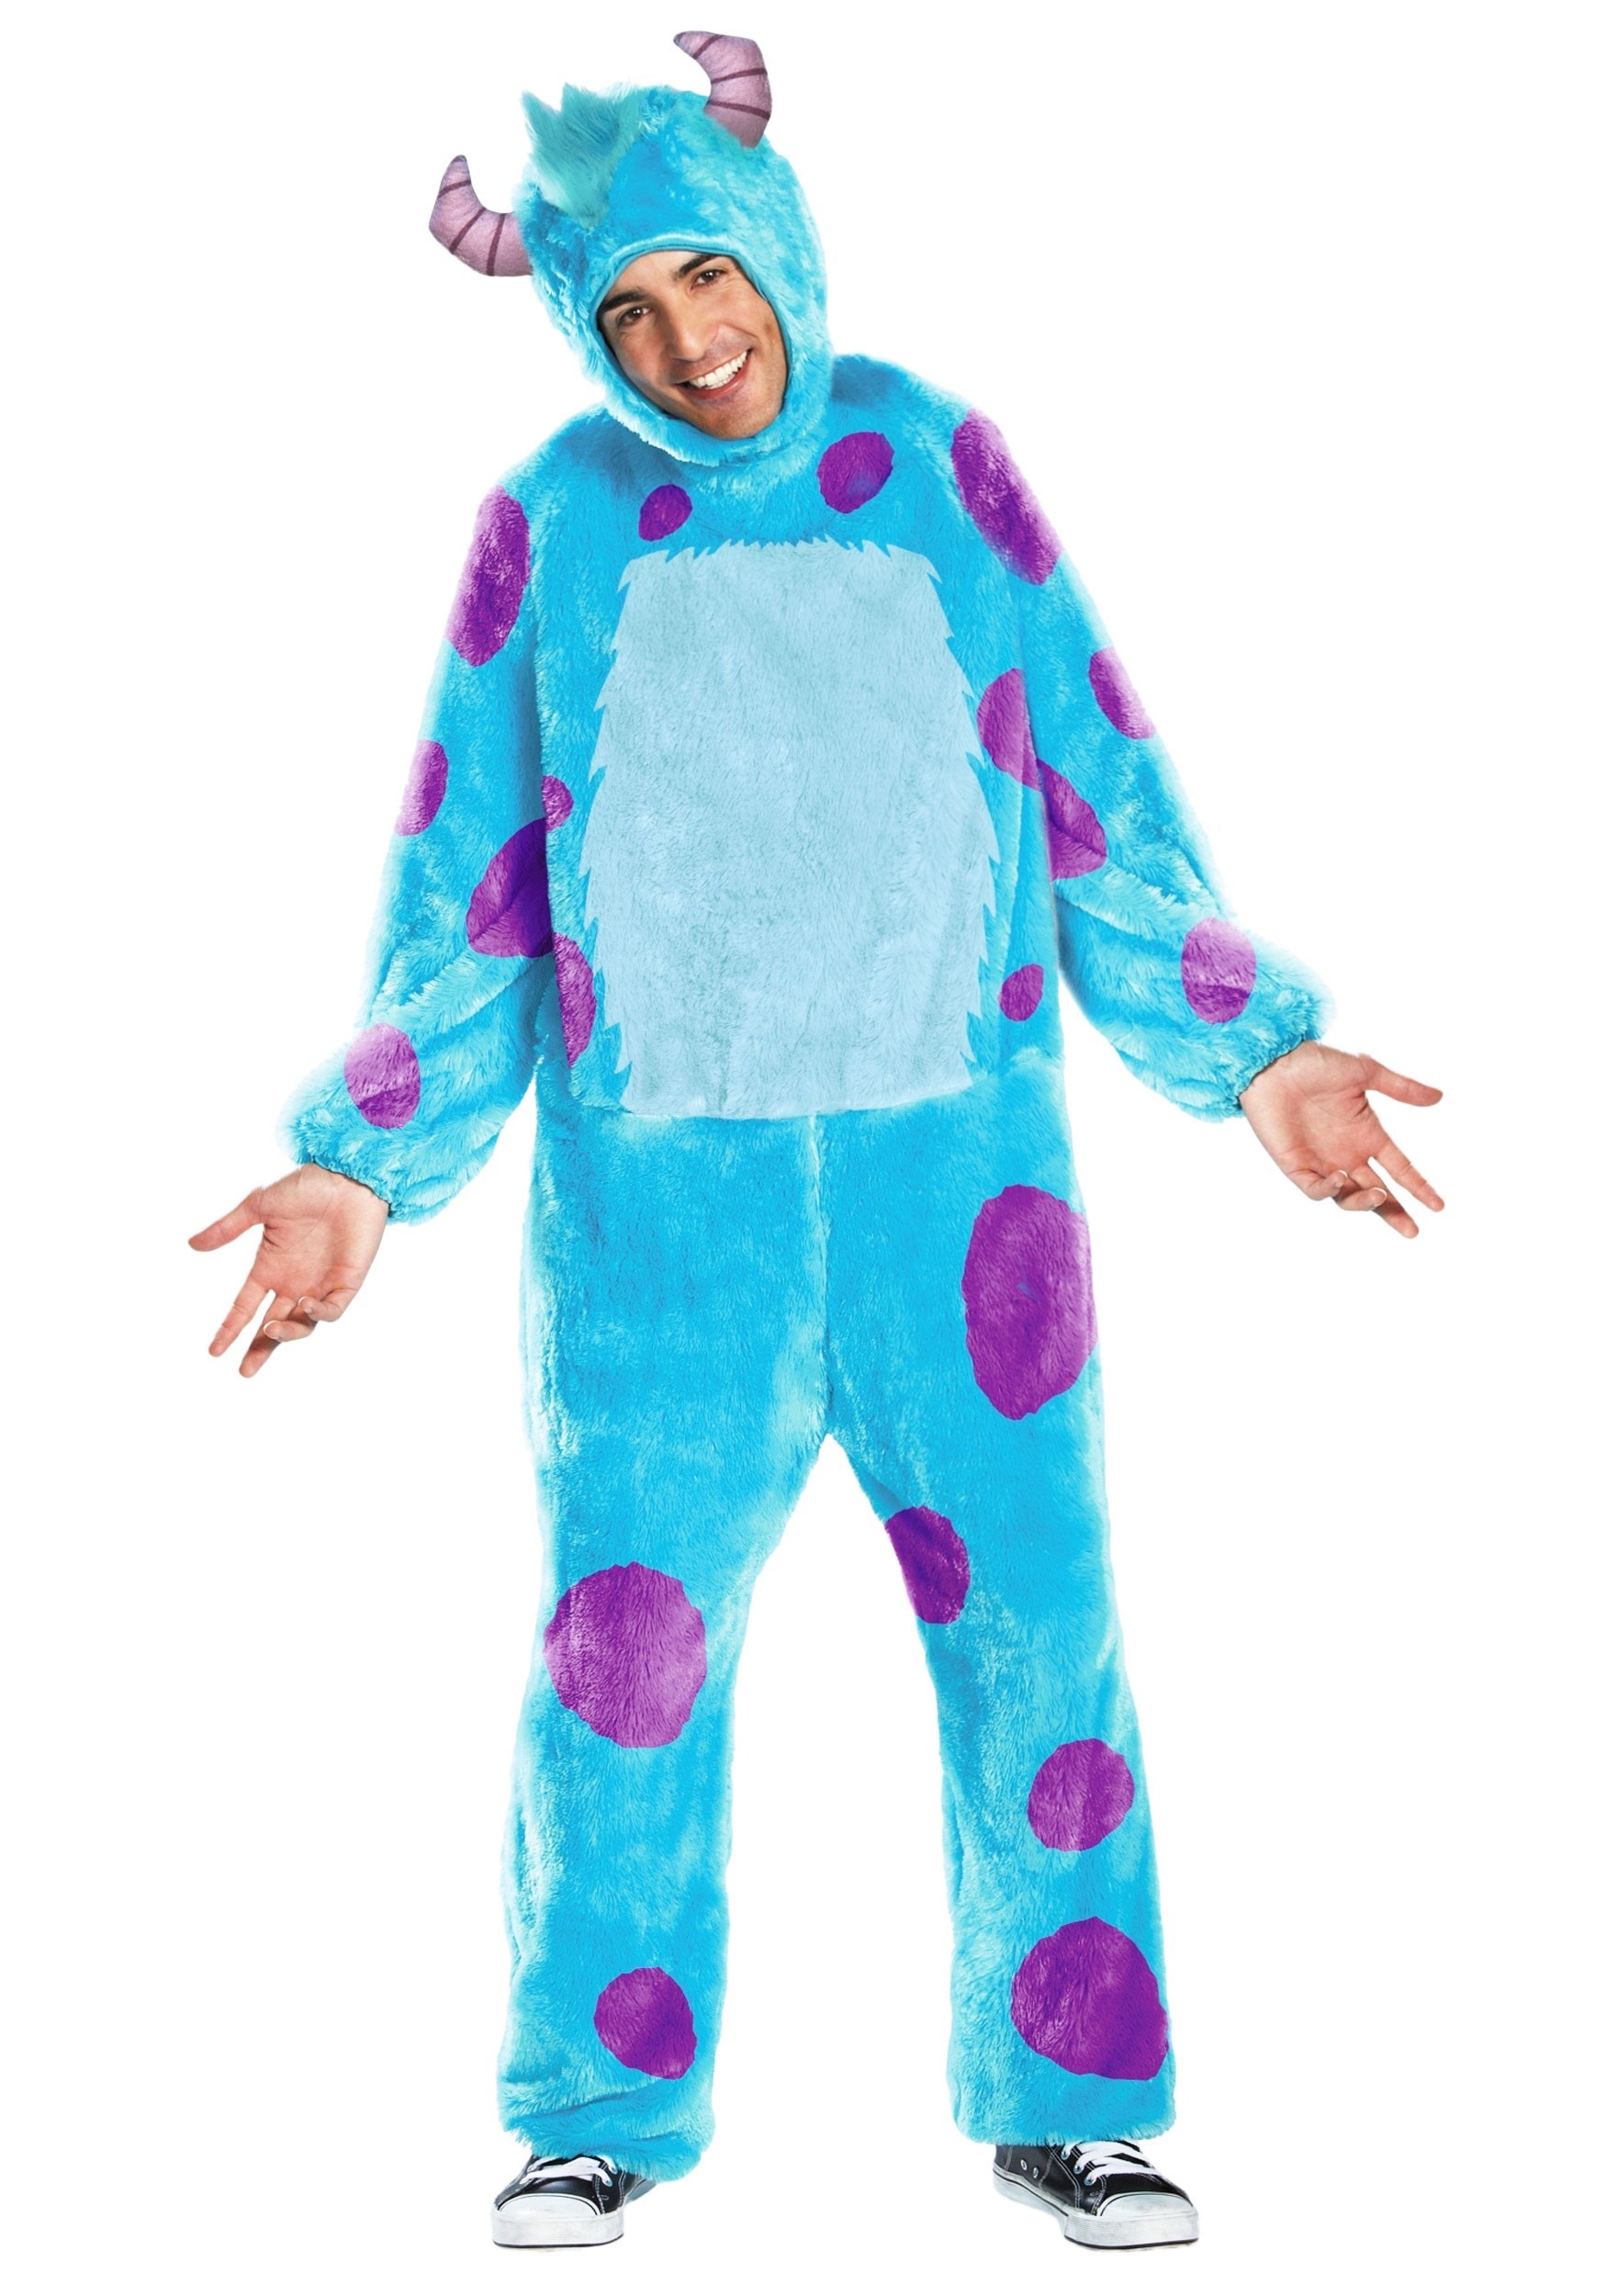 Monsters Inc Costumes, Toys & Merch